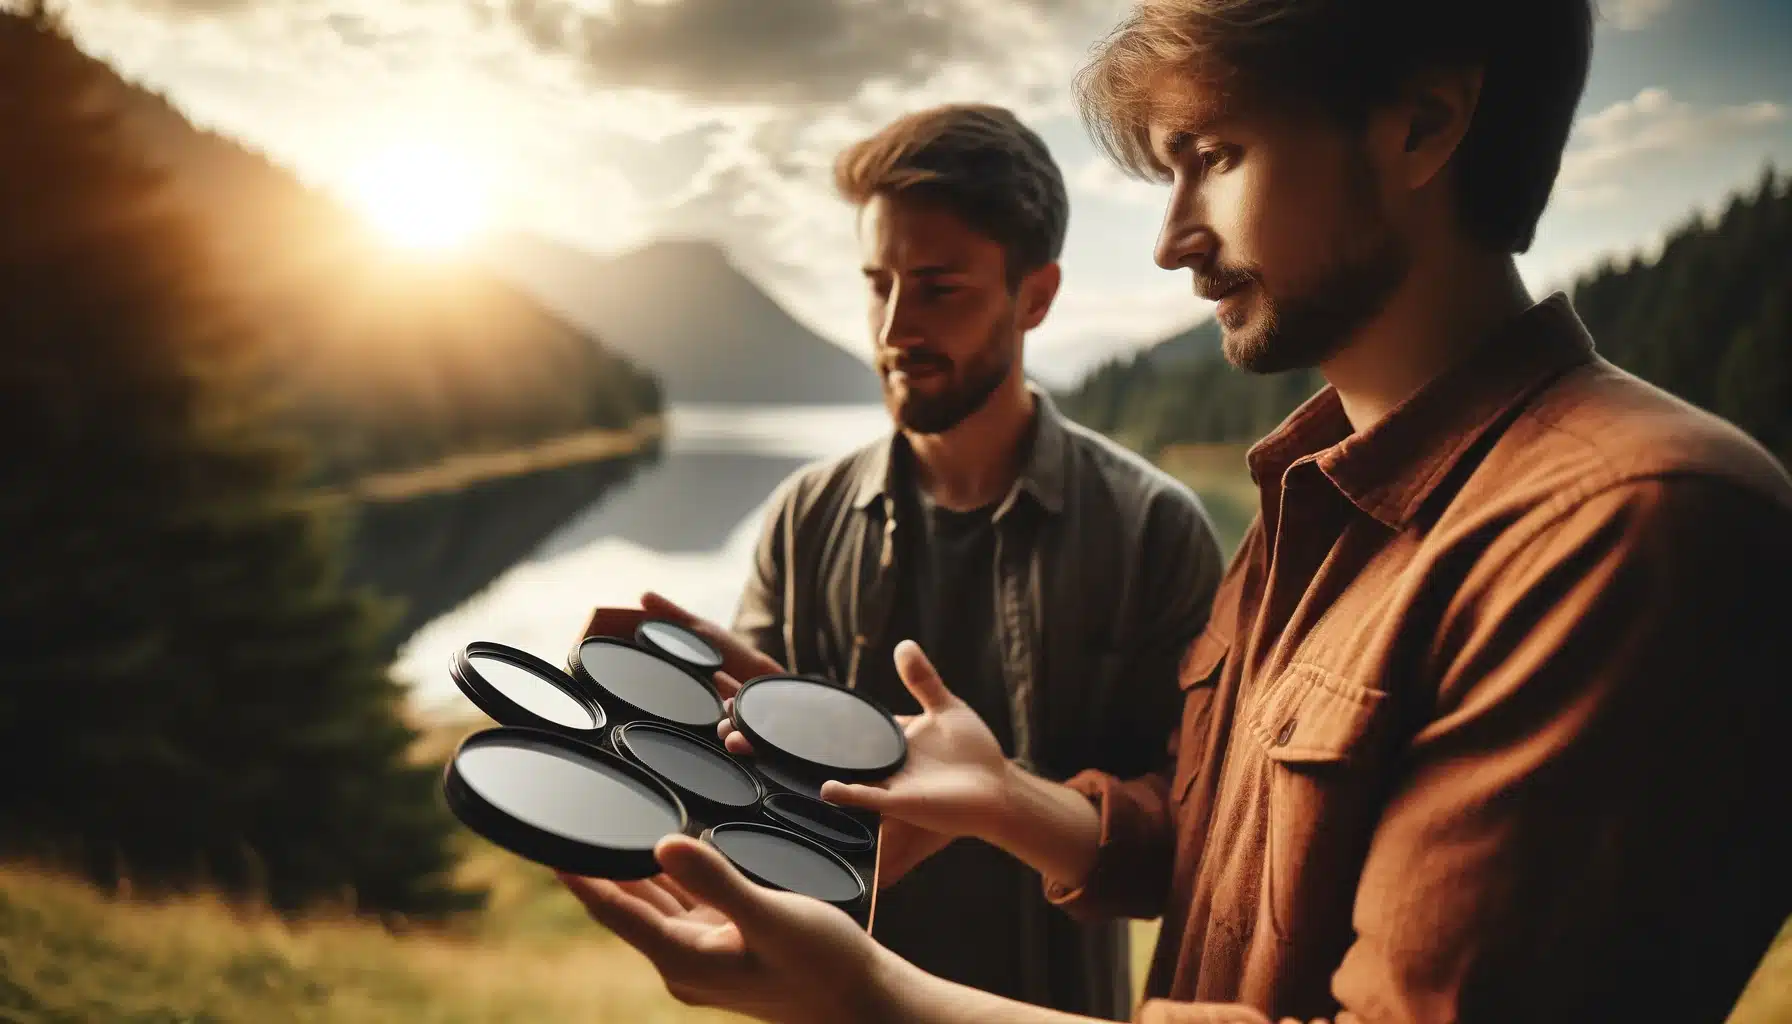 Two people examining a set of neutral density (ND) filters in an outdoor setting with a picturesque landscape in the background